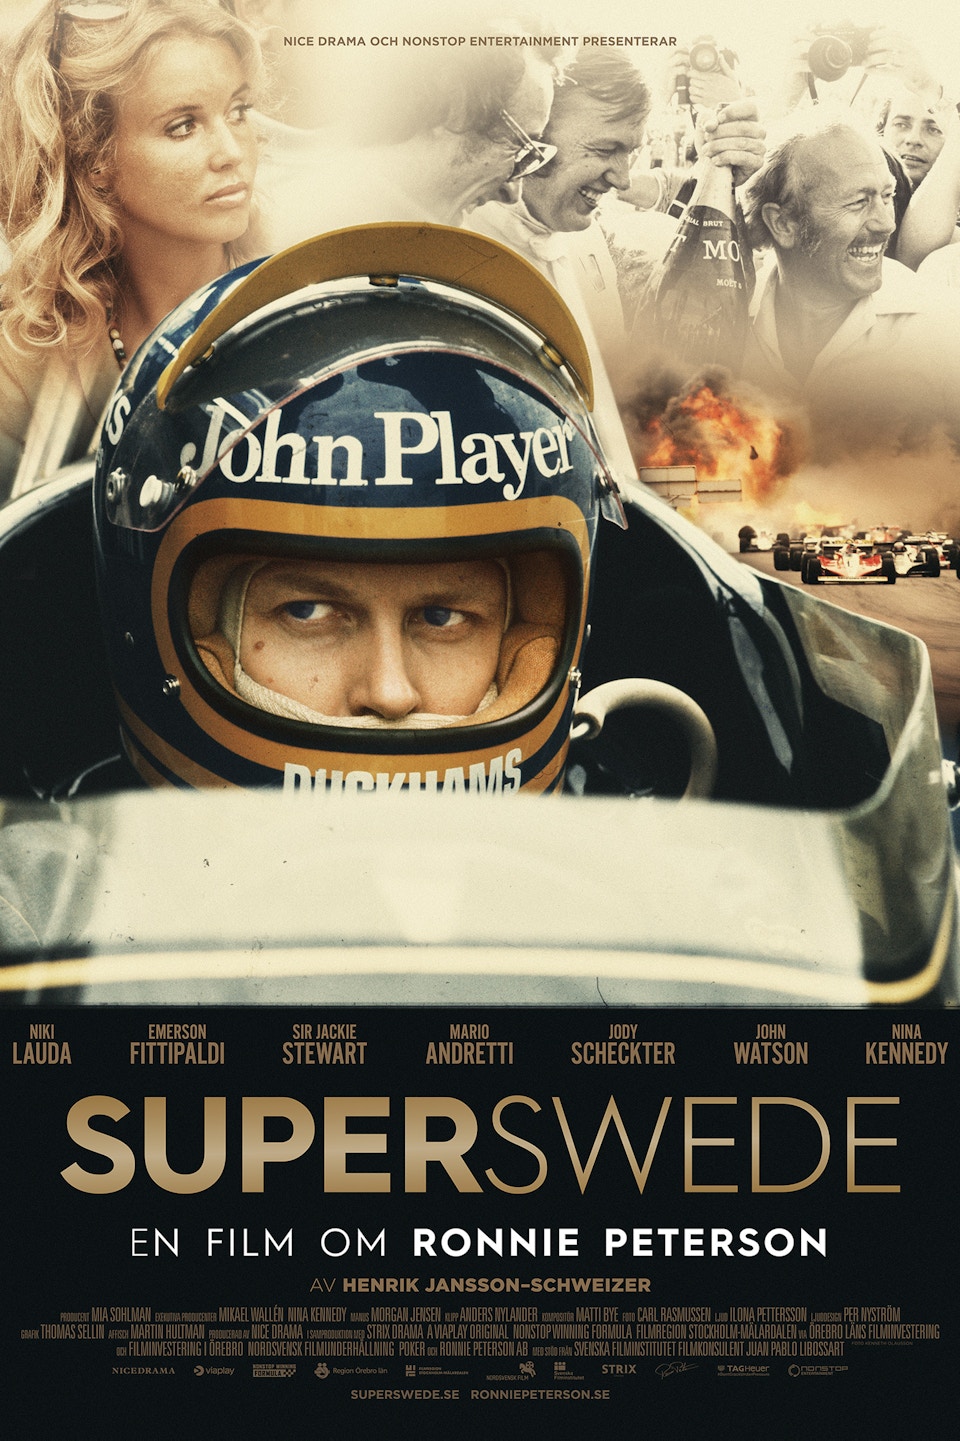 SUPERSWEDE - The documentary of Ronnie Peterson